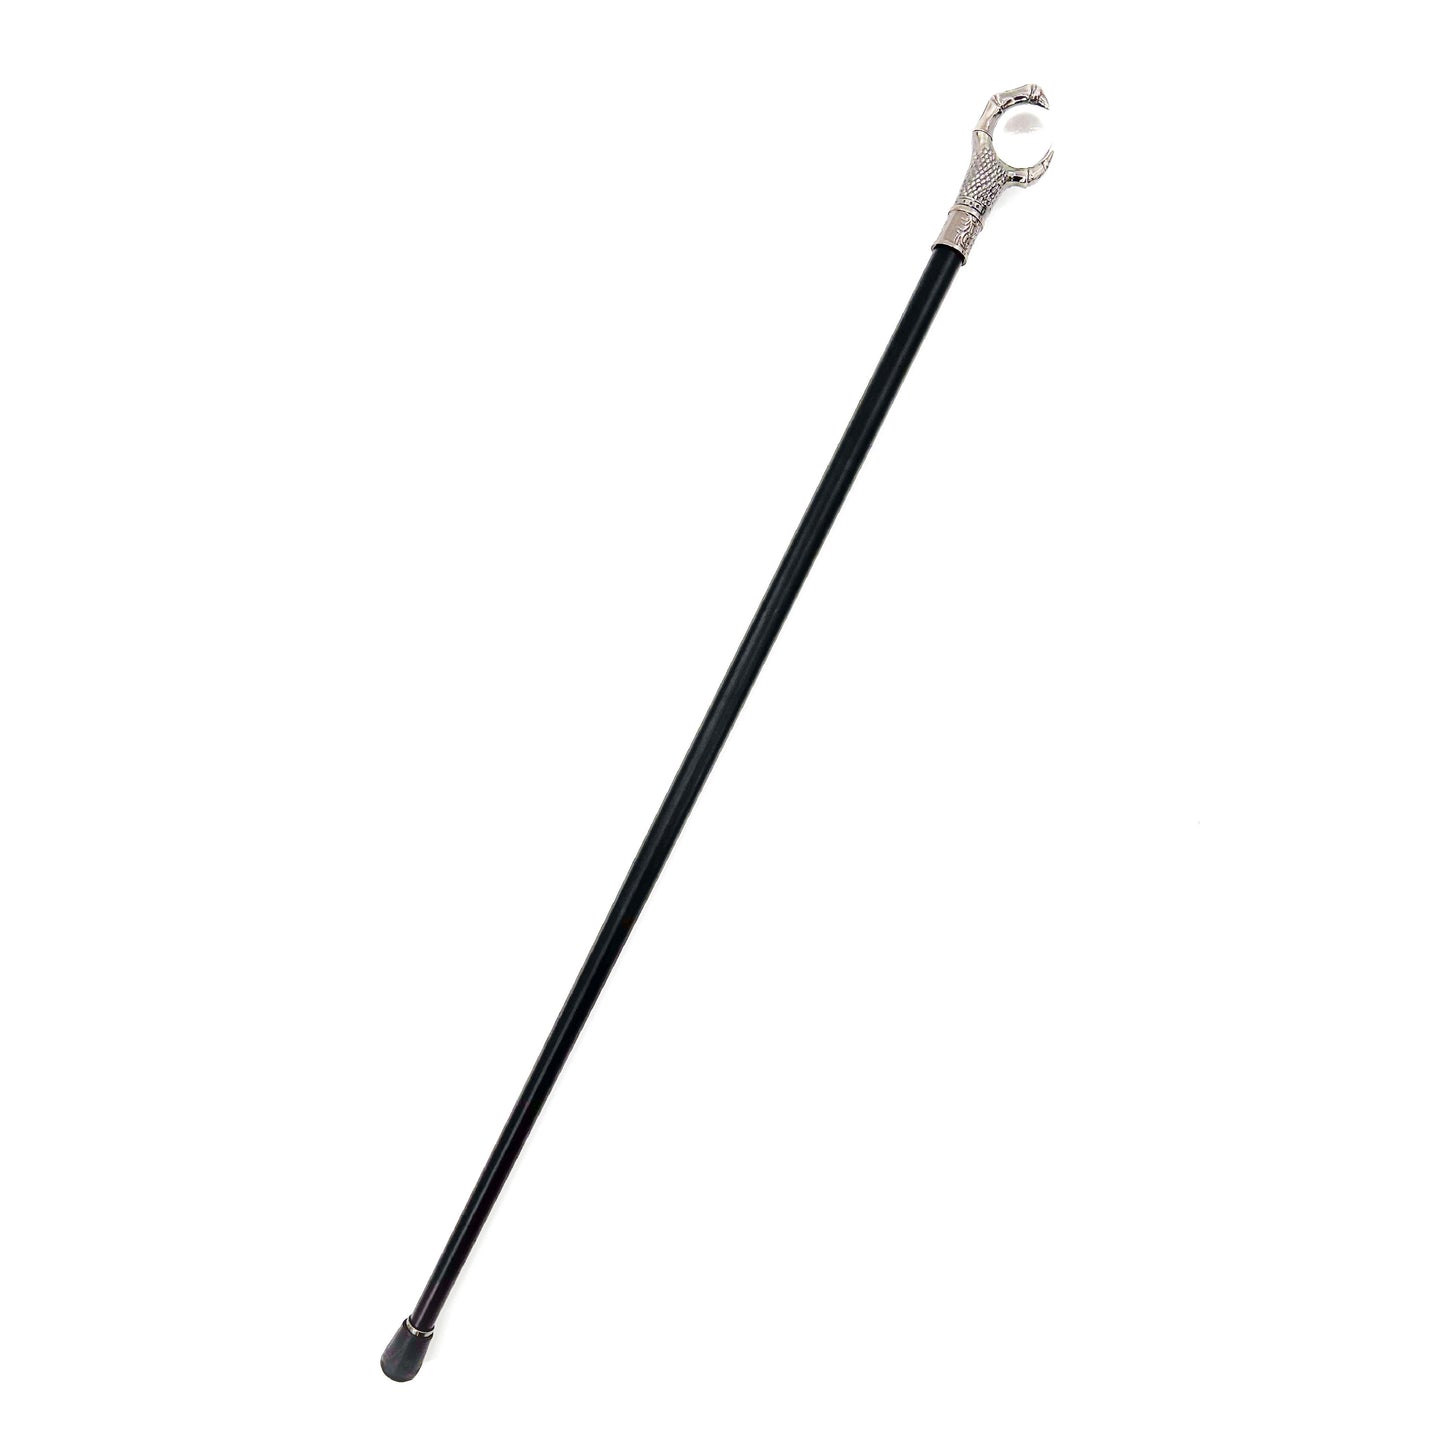 Dragon Master of Protection Walking Sword Cane-1